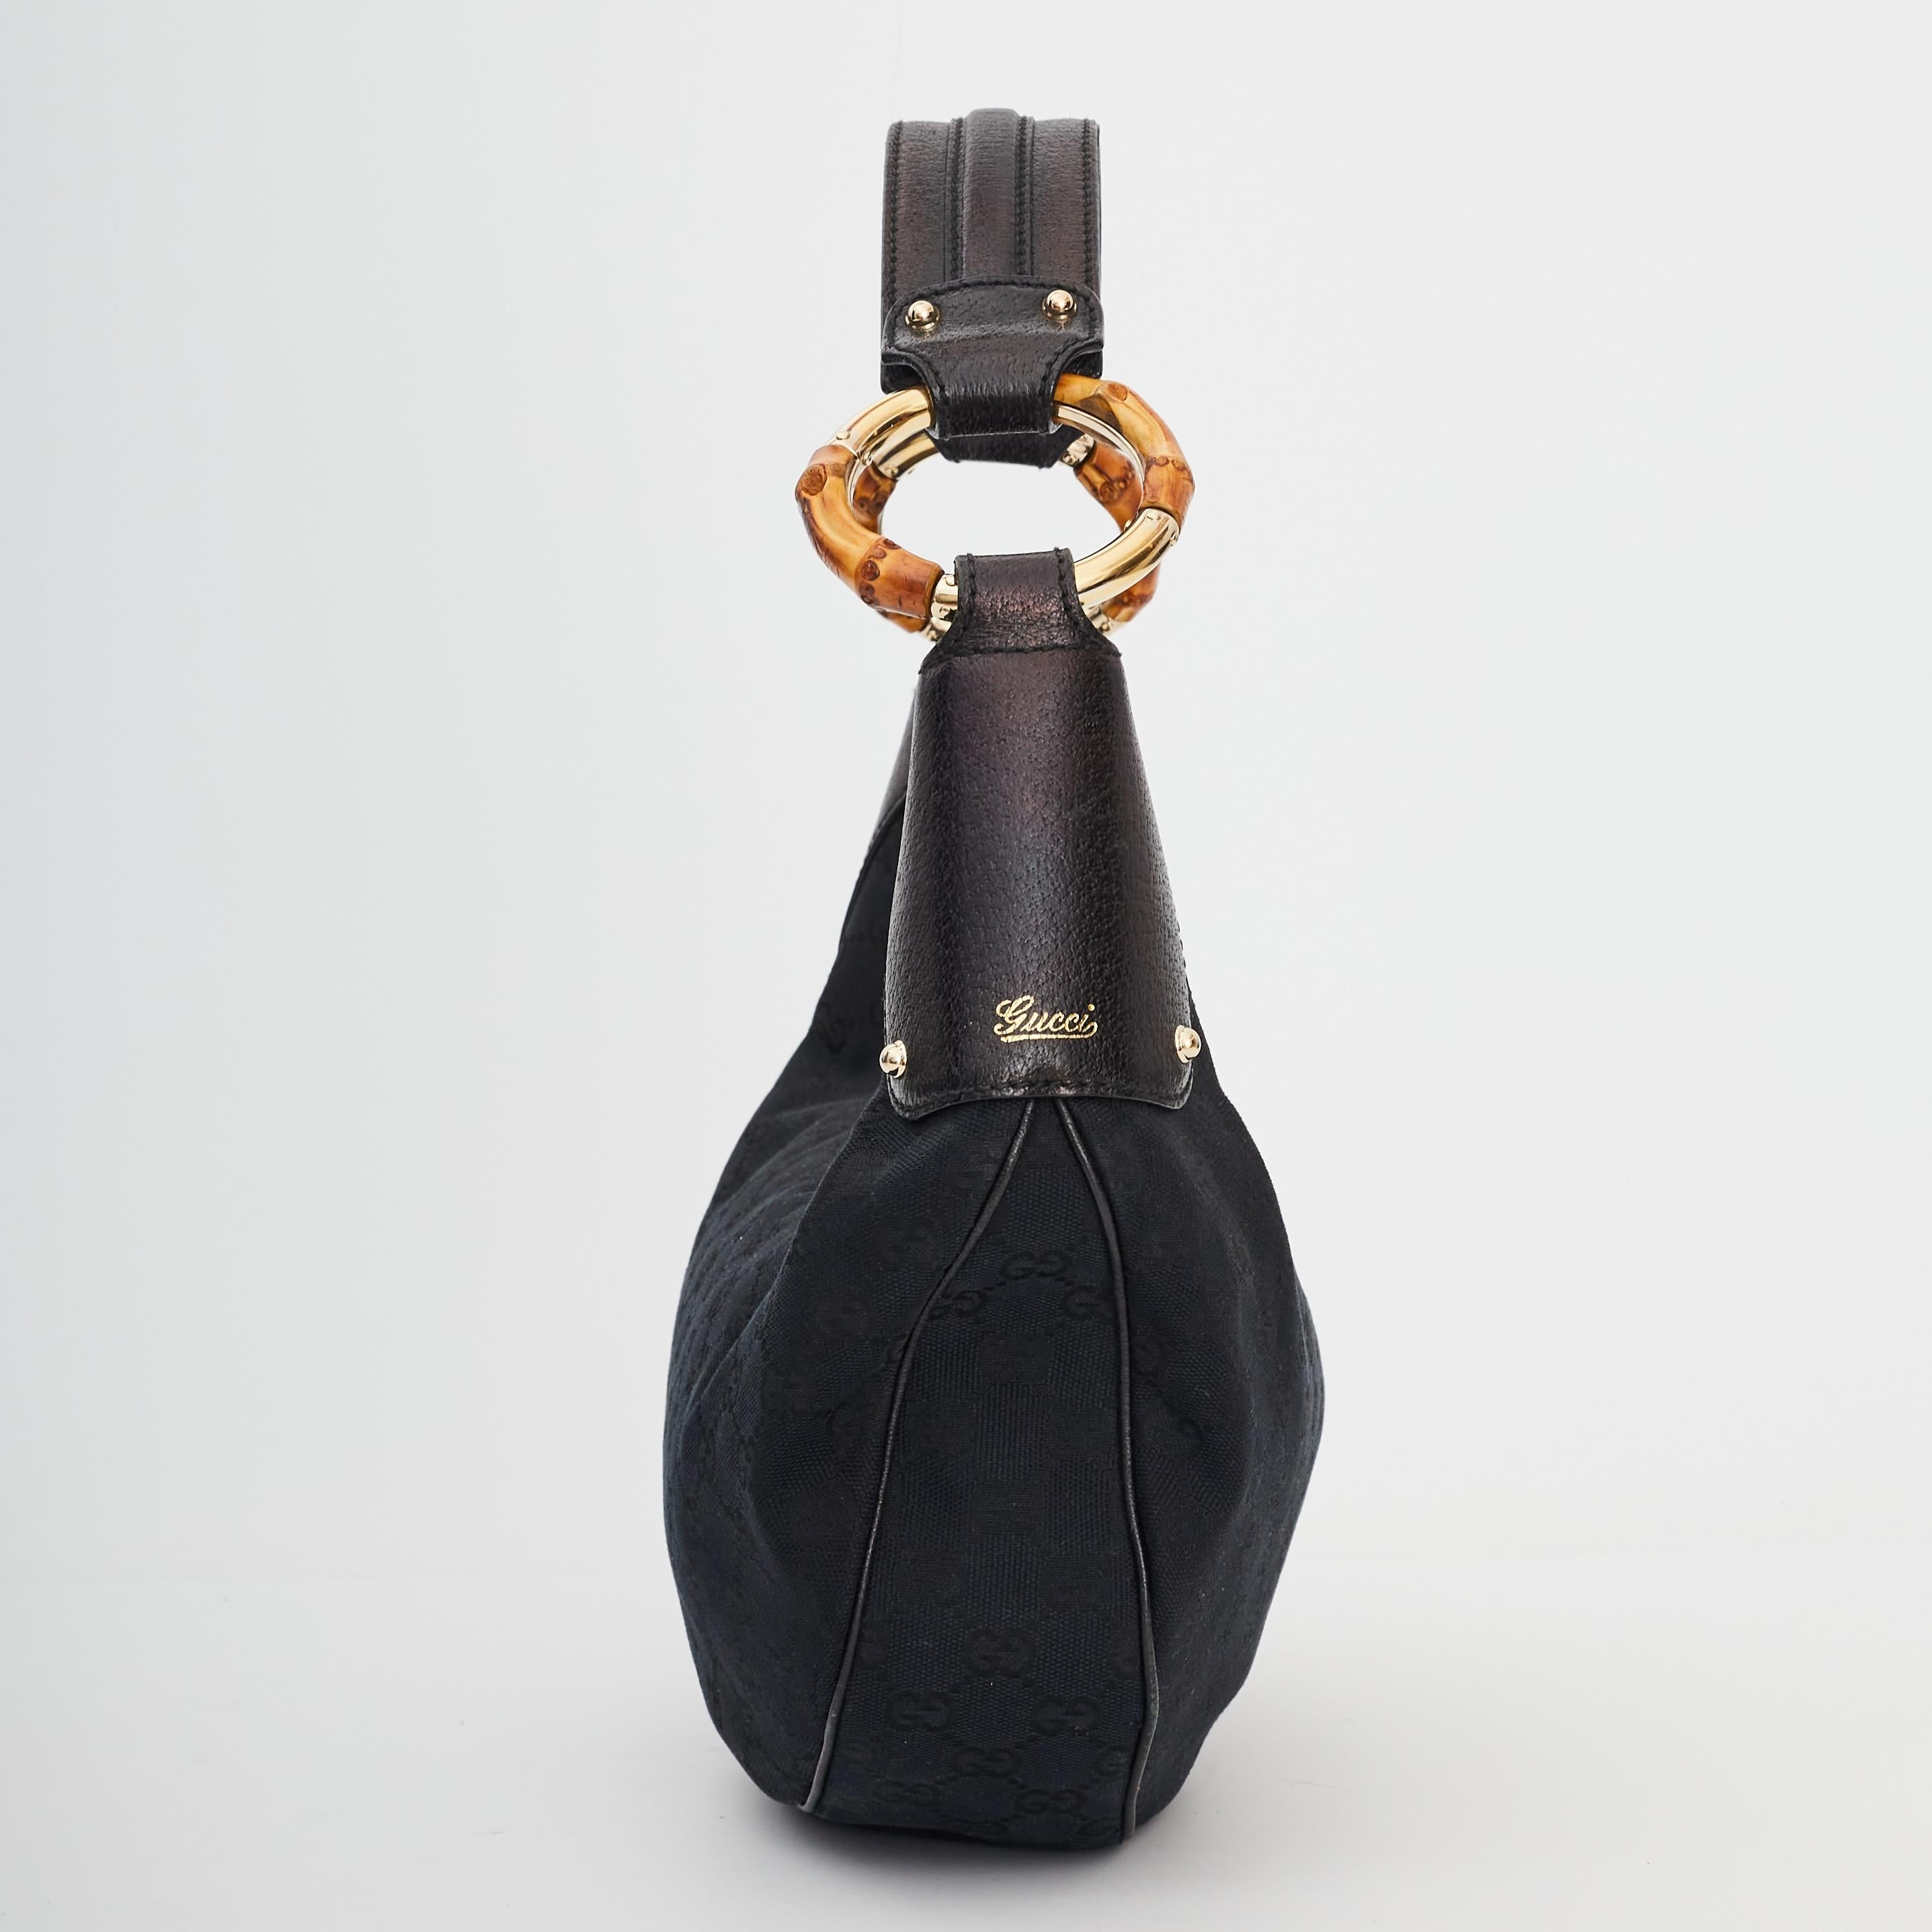 This classically structured hobo is beautifully made of black Gucci GG monogram canvas. The bag features matching black cowhide leather top corners and a looping shoulder strap. The hardware is brass incorporated with bamboo for an added touch of